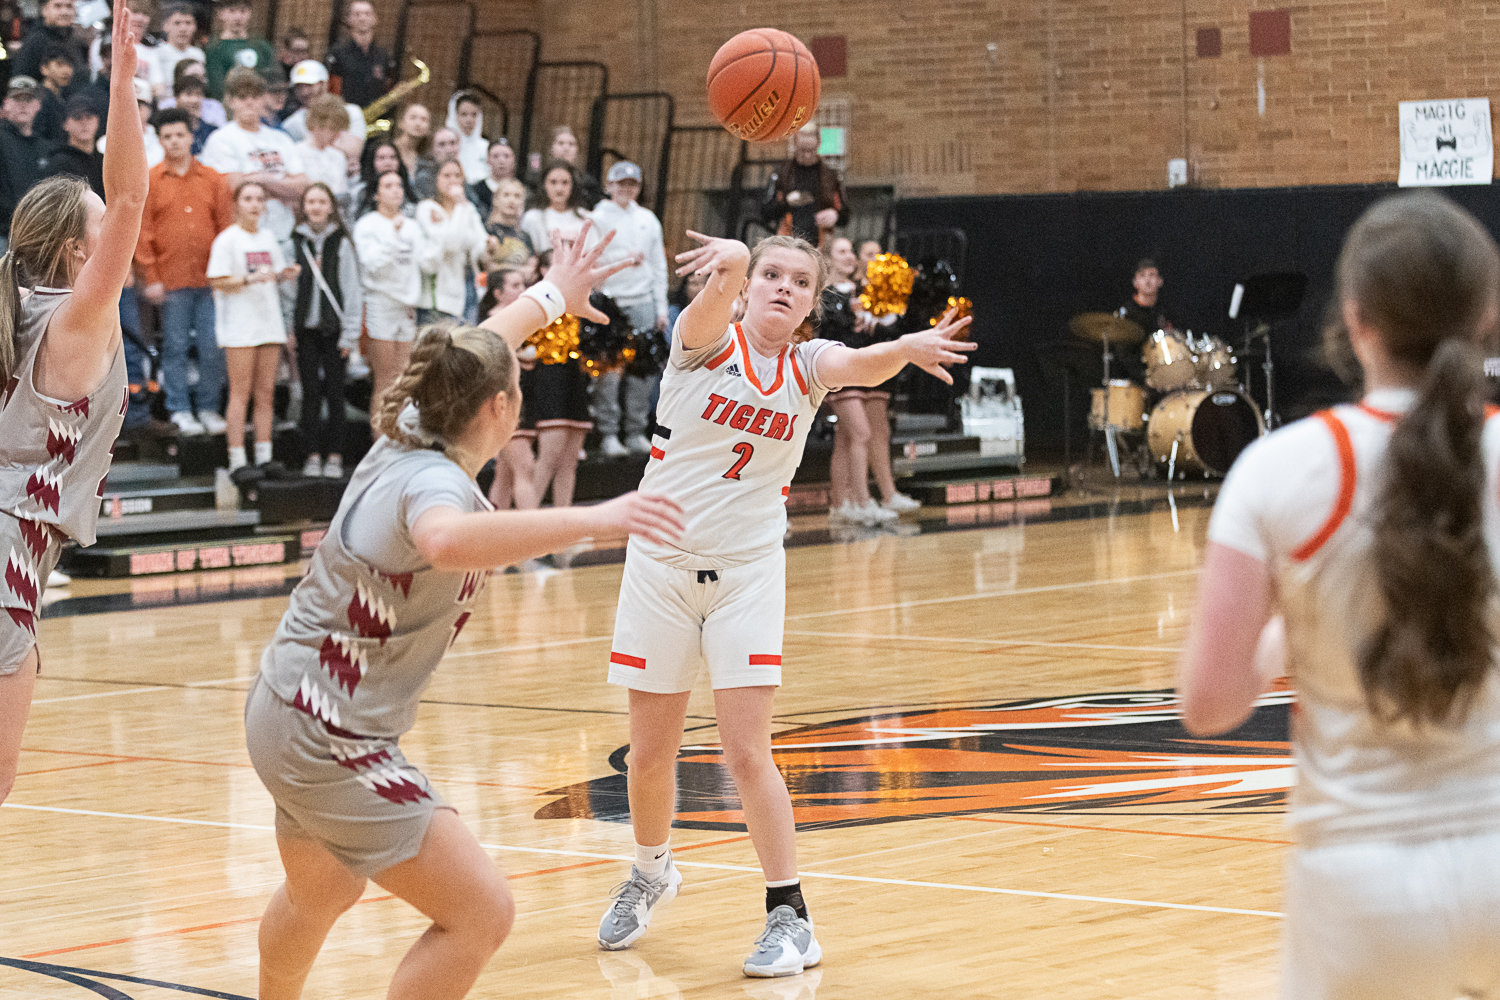 Brooklyn Sprague throws a pass during the first quarter of Centralia's loss to W.F. West on Feb. 1.